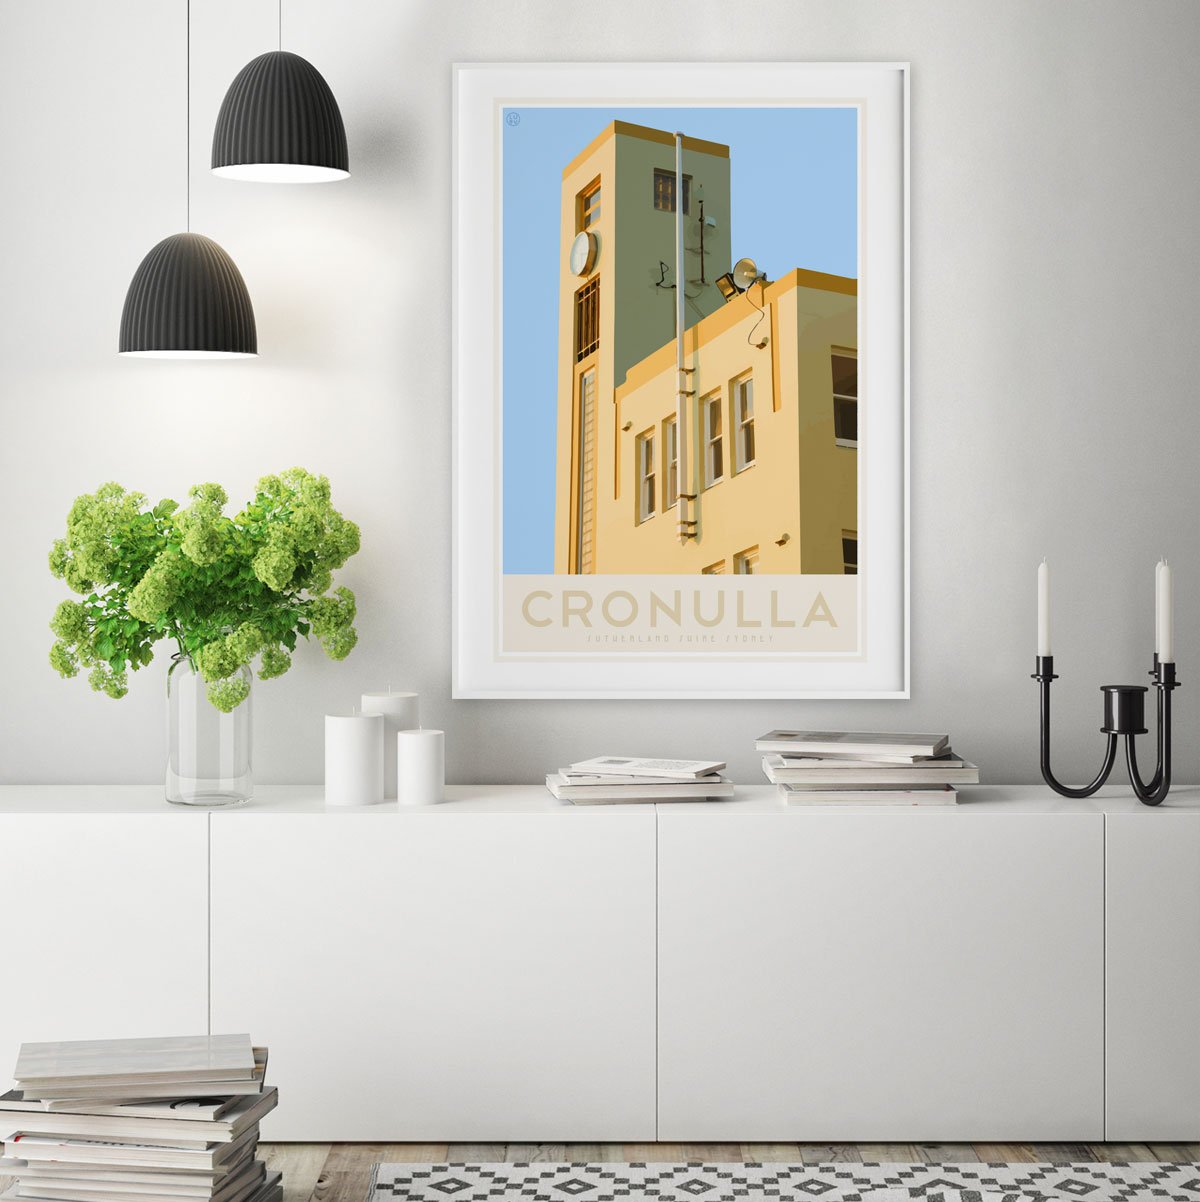 Cronulla Beach vintage travel style print, designed by places we luv